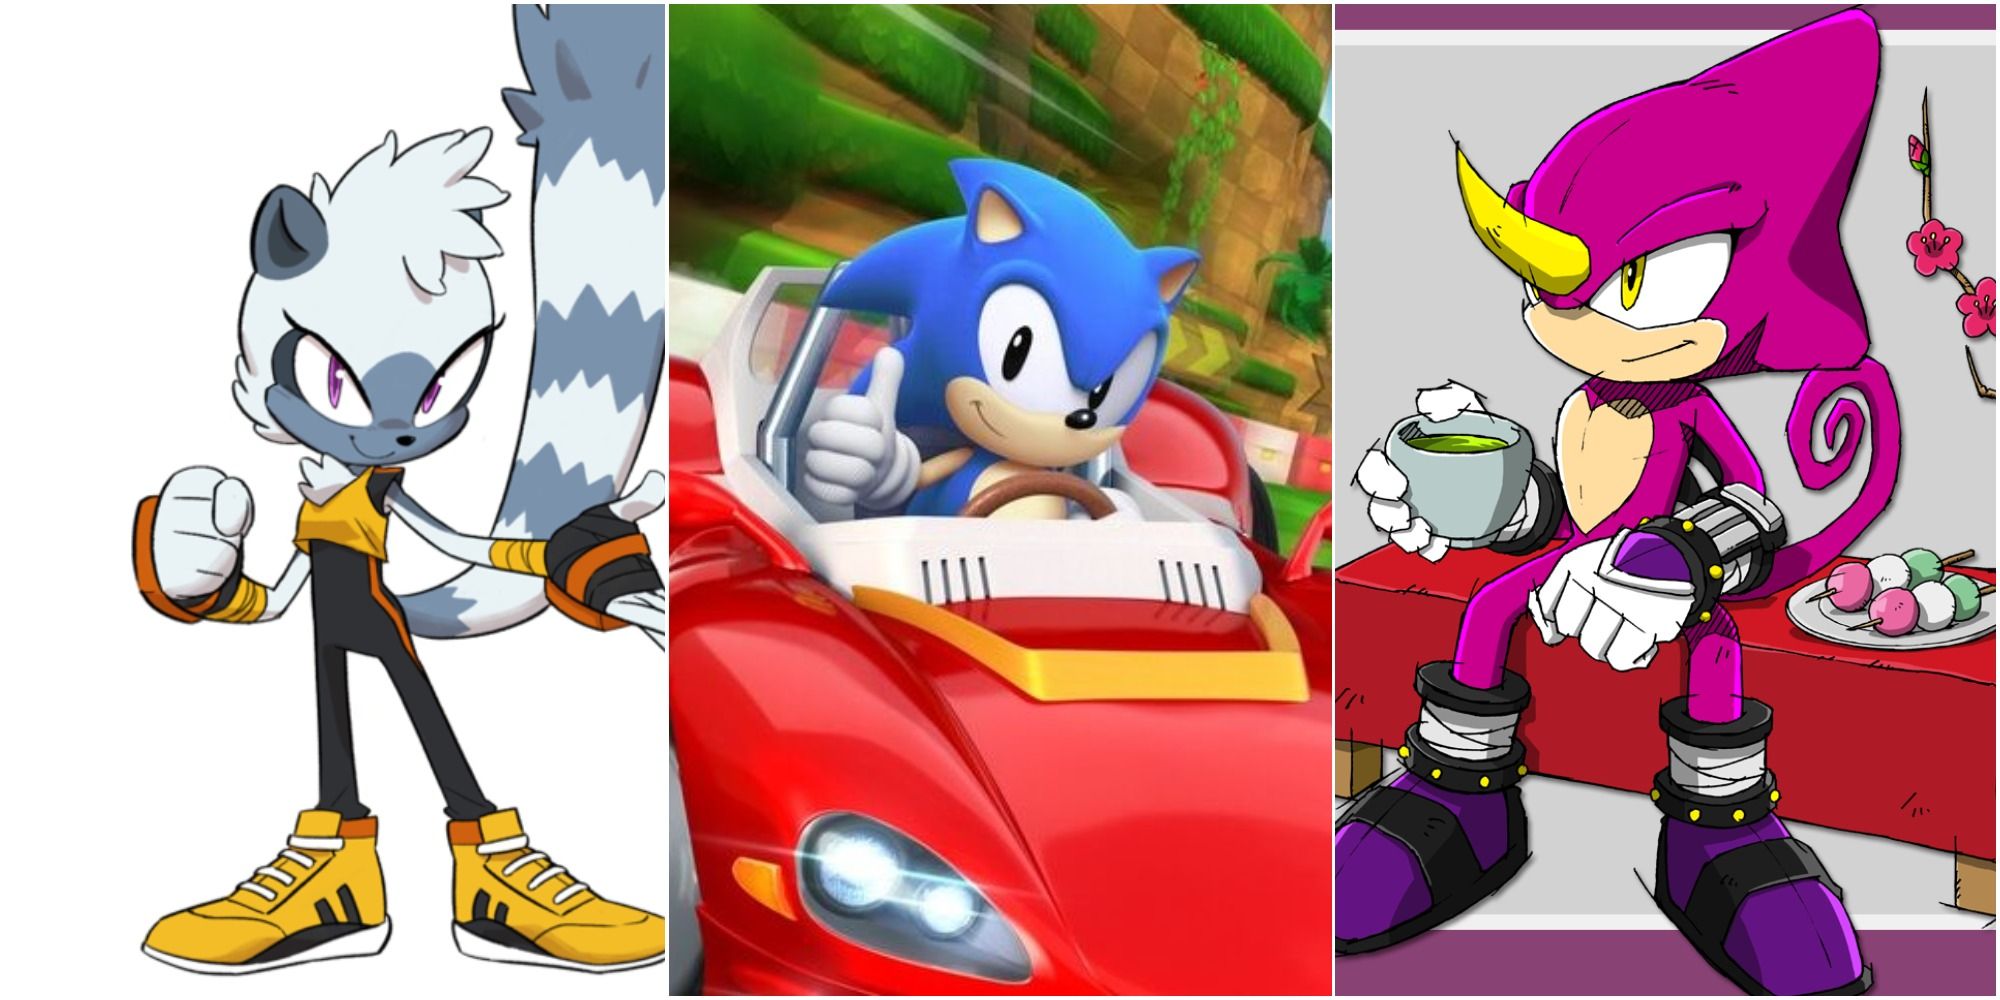 Tangle stands next to Classic Sonic driving a car and Espio enjoying some tea